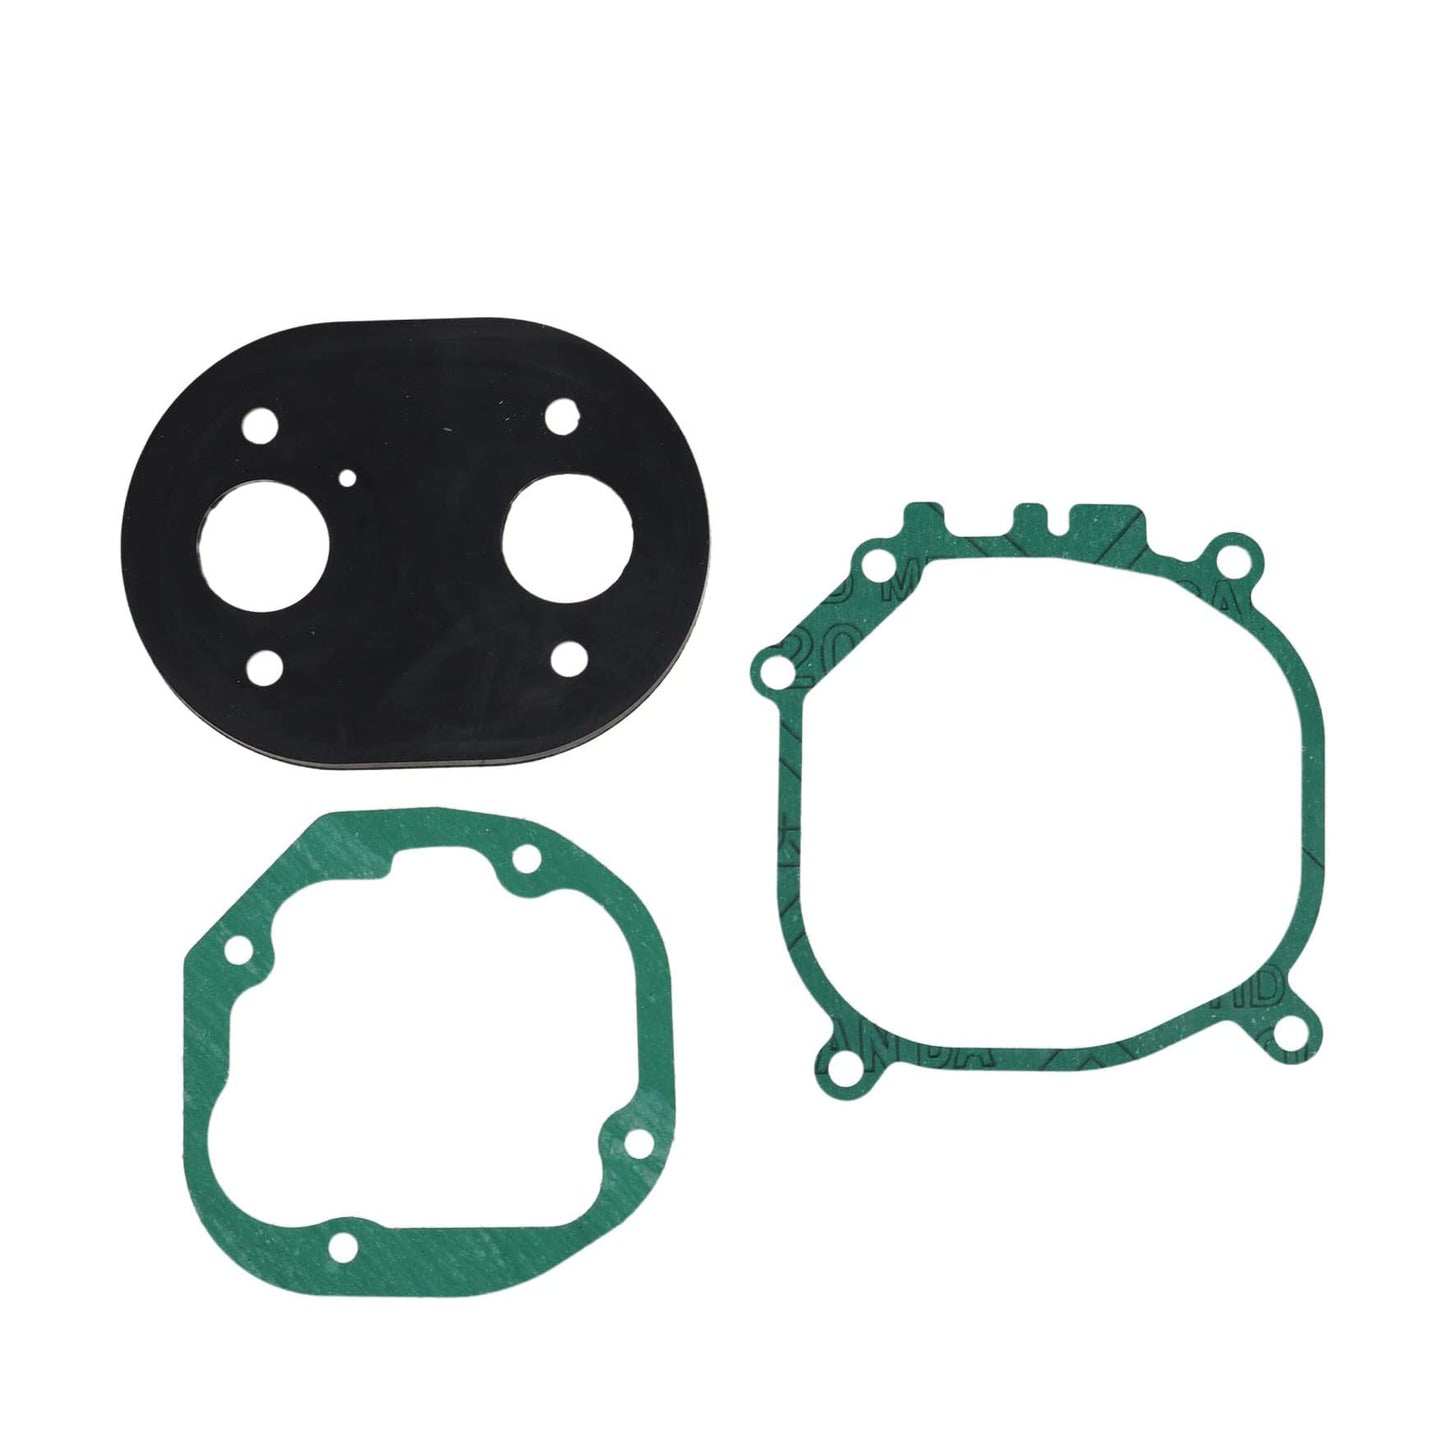 New Gasket Set 82302A 1322586A 1322638A 5010159A Compatible with Webasto Heater Air Top 2000 D/S/ST/STC